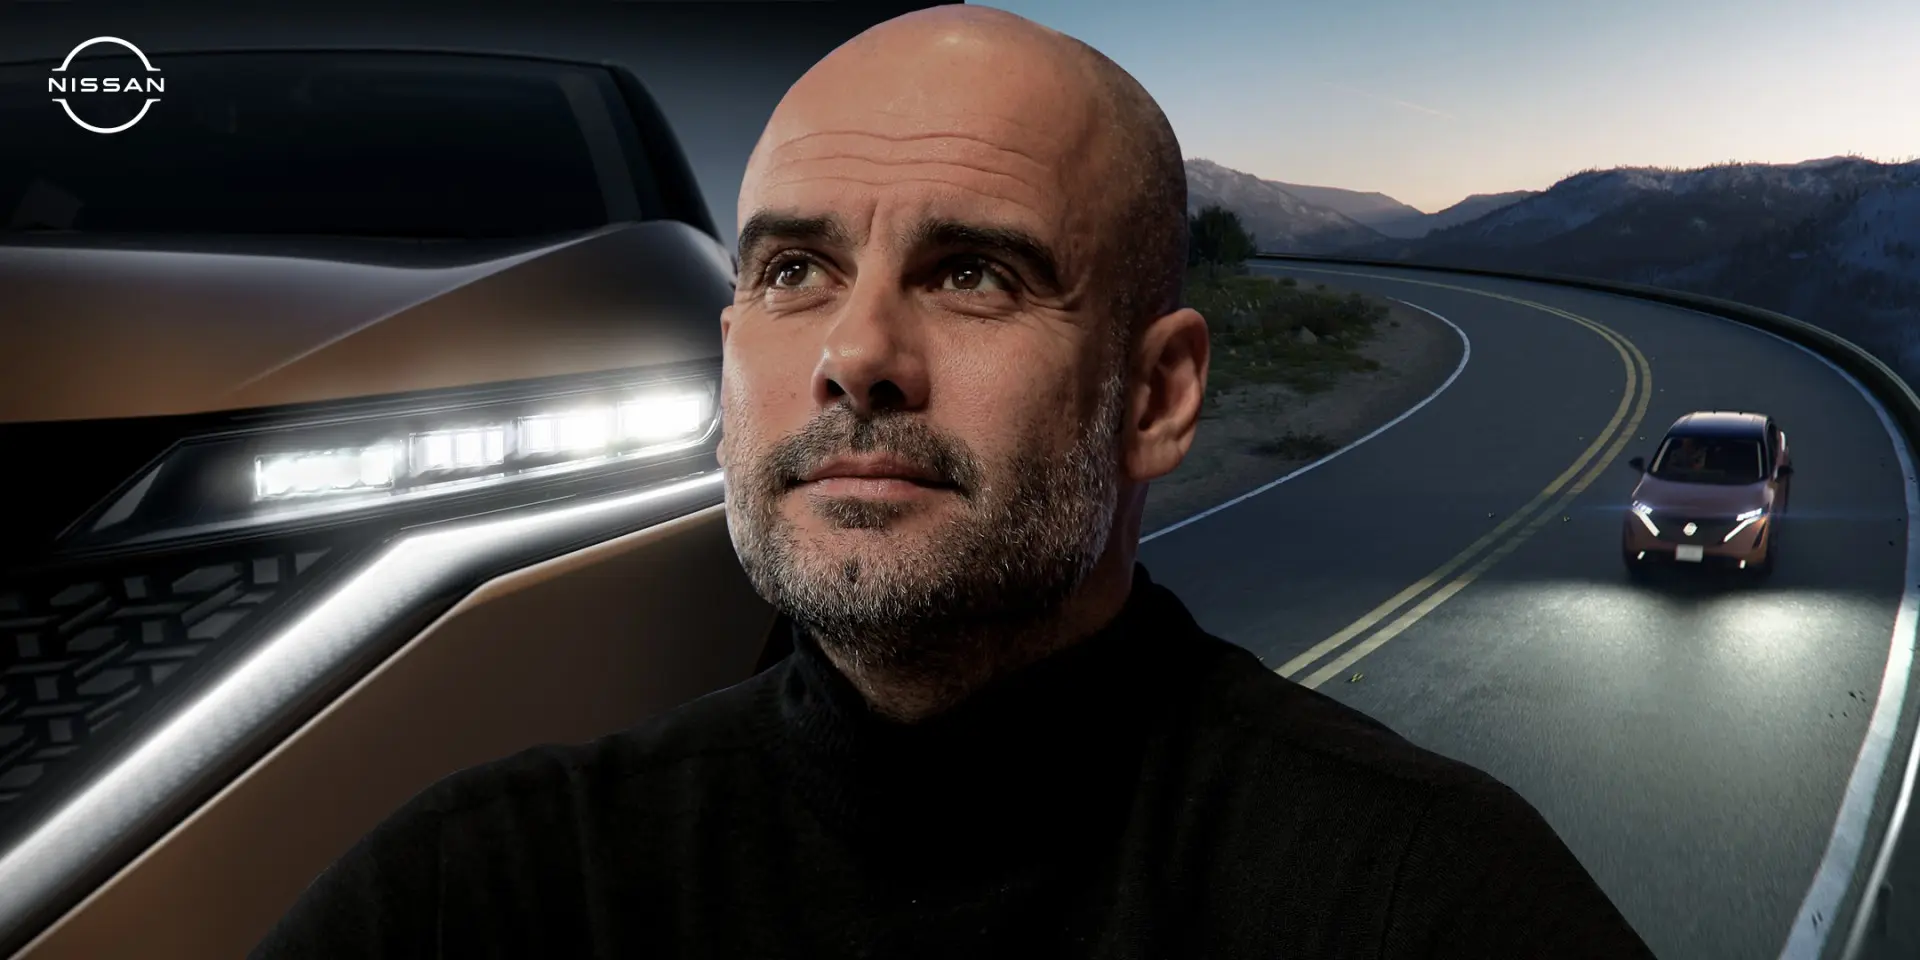 Pep in Nissan